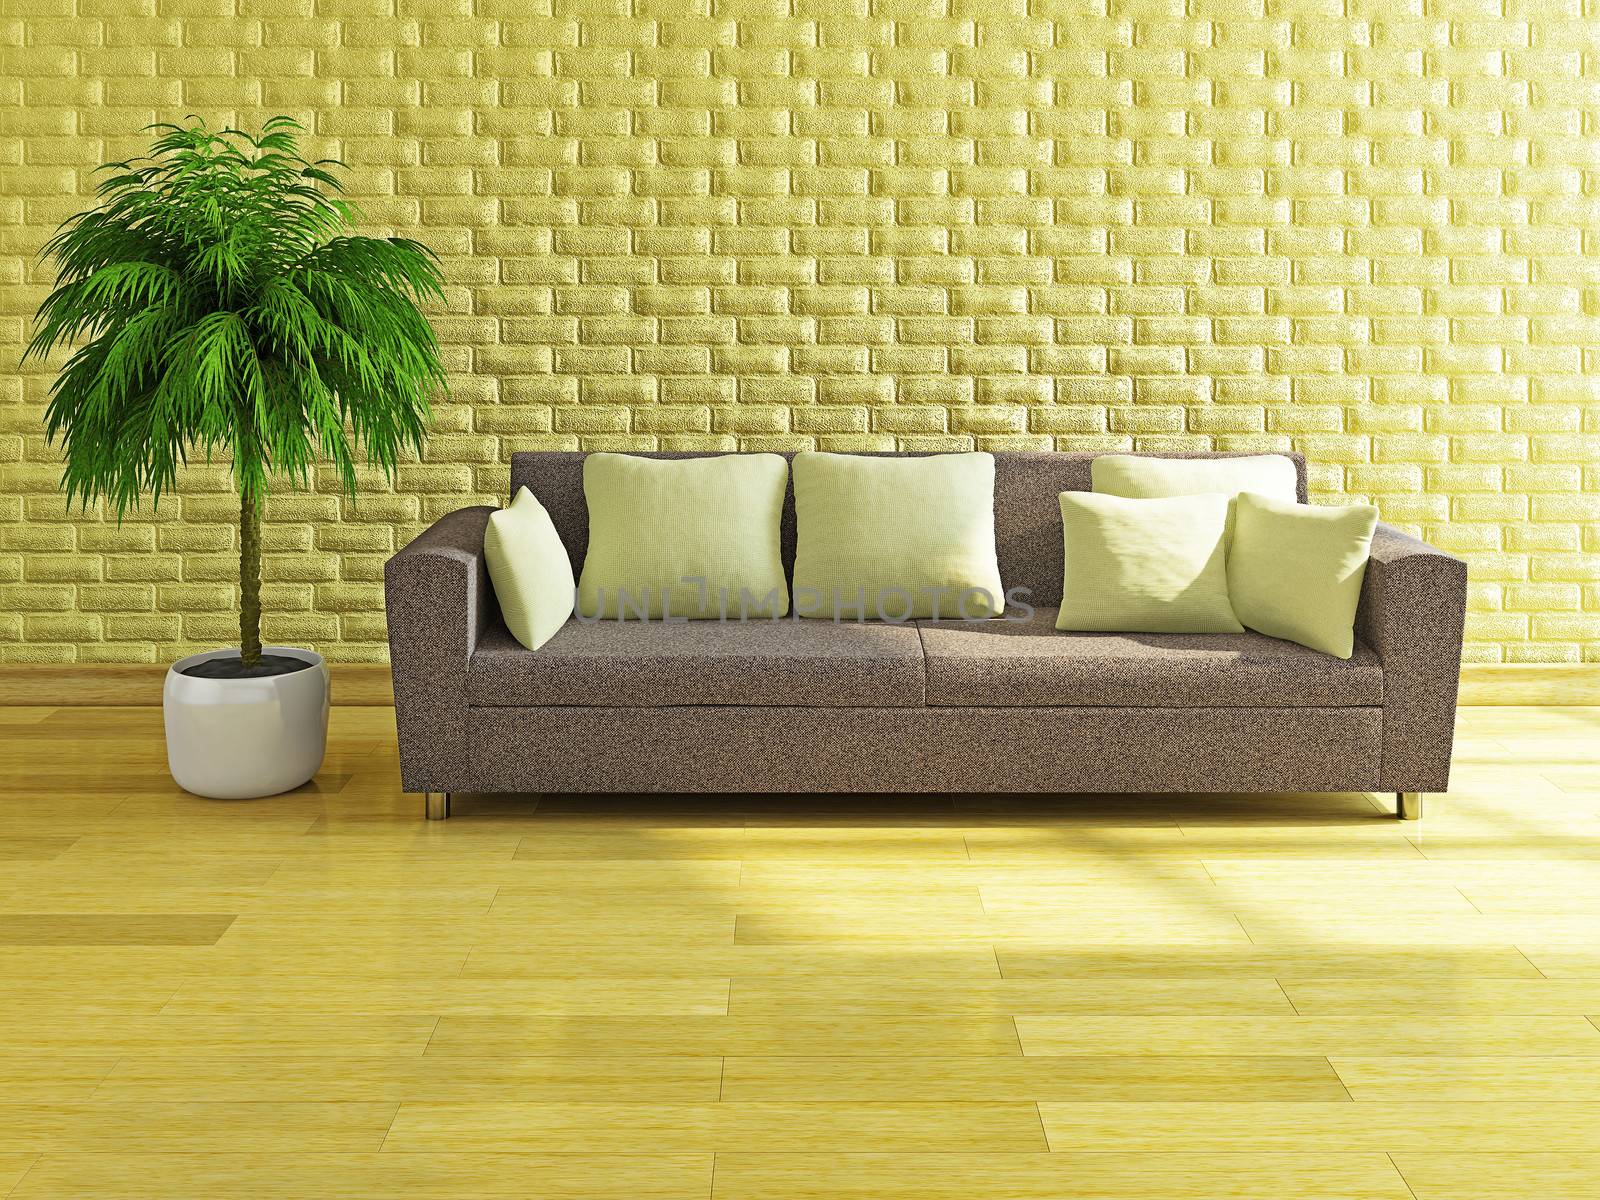 Sofa with yellow pillows near the brick wall